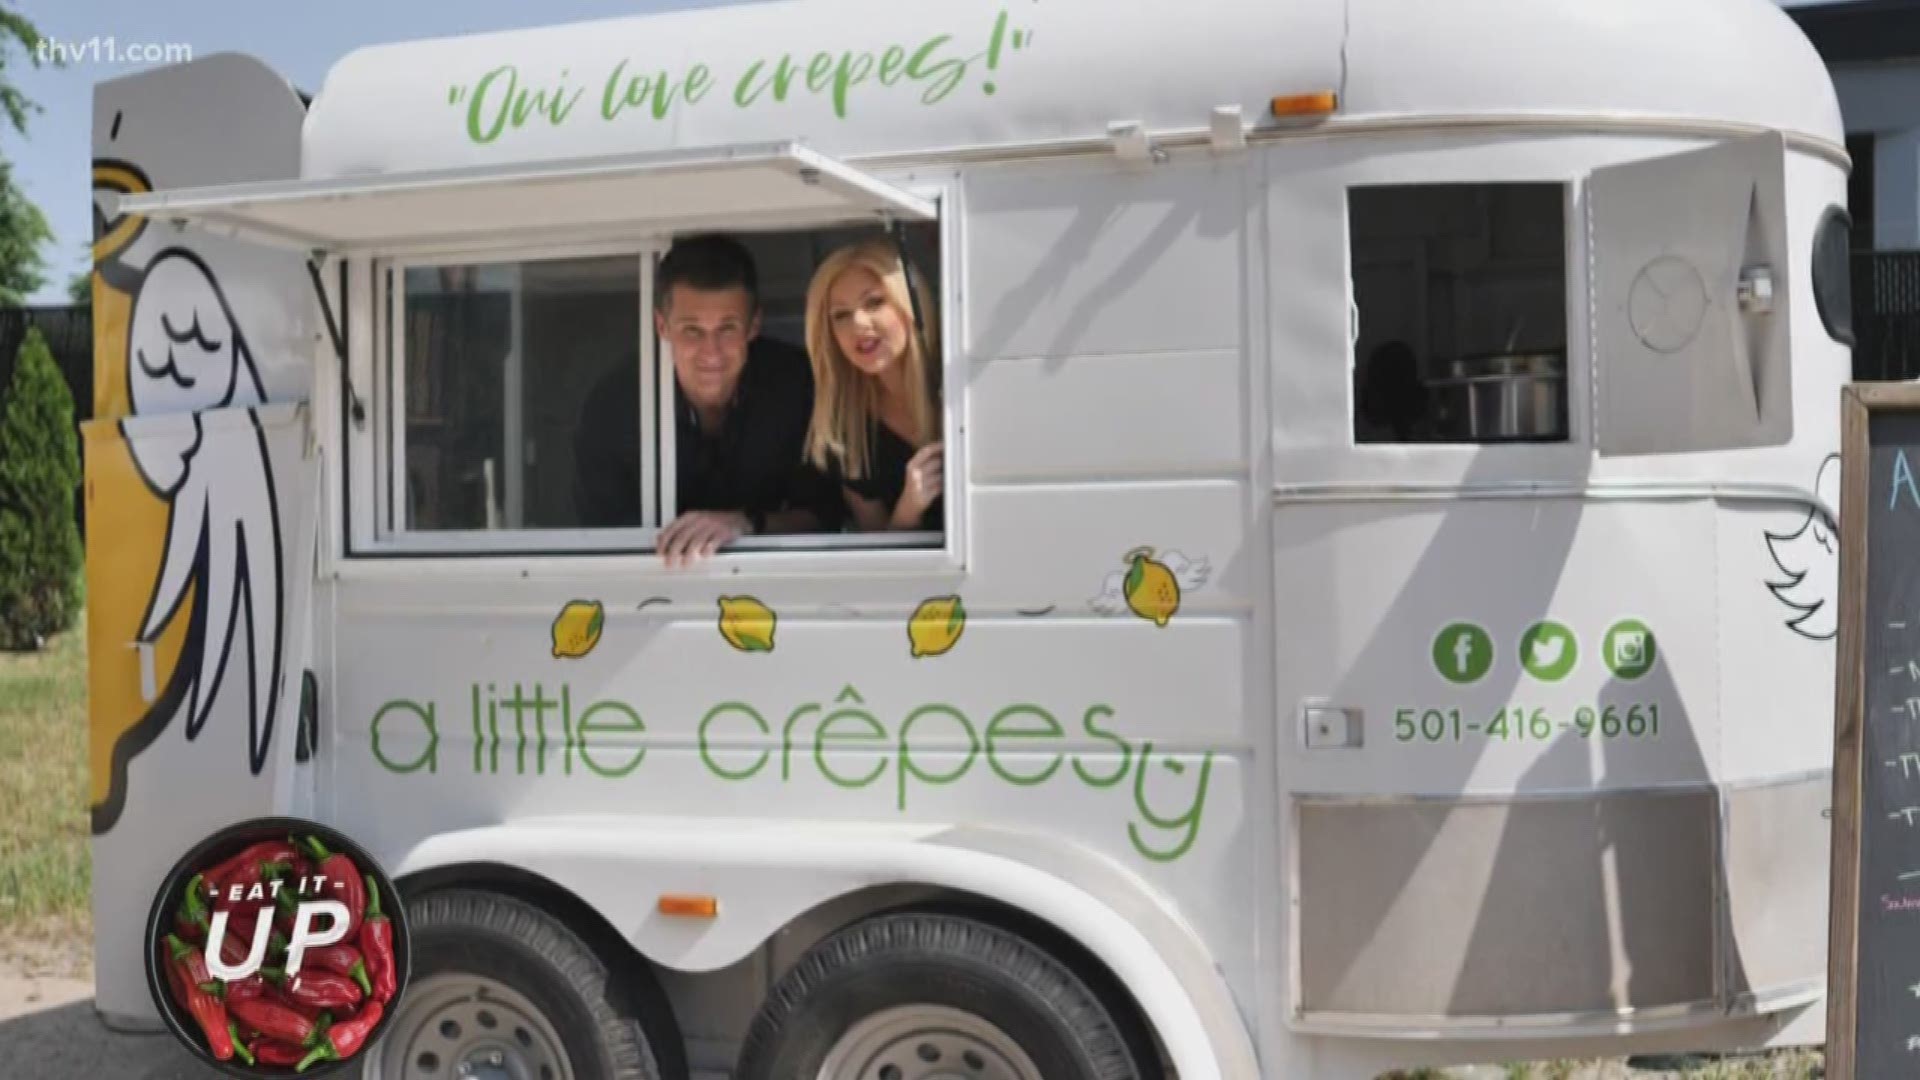 From Nutella smothered crepes to crepes filled with BBQ, this little horse trailer food truck is serving up enough for the biggest appetites!